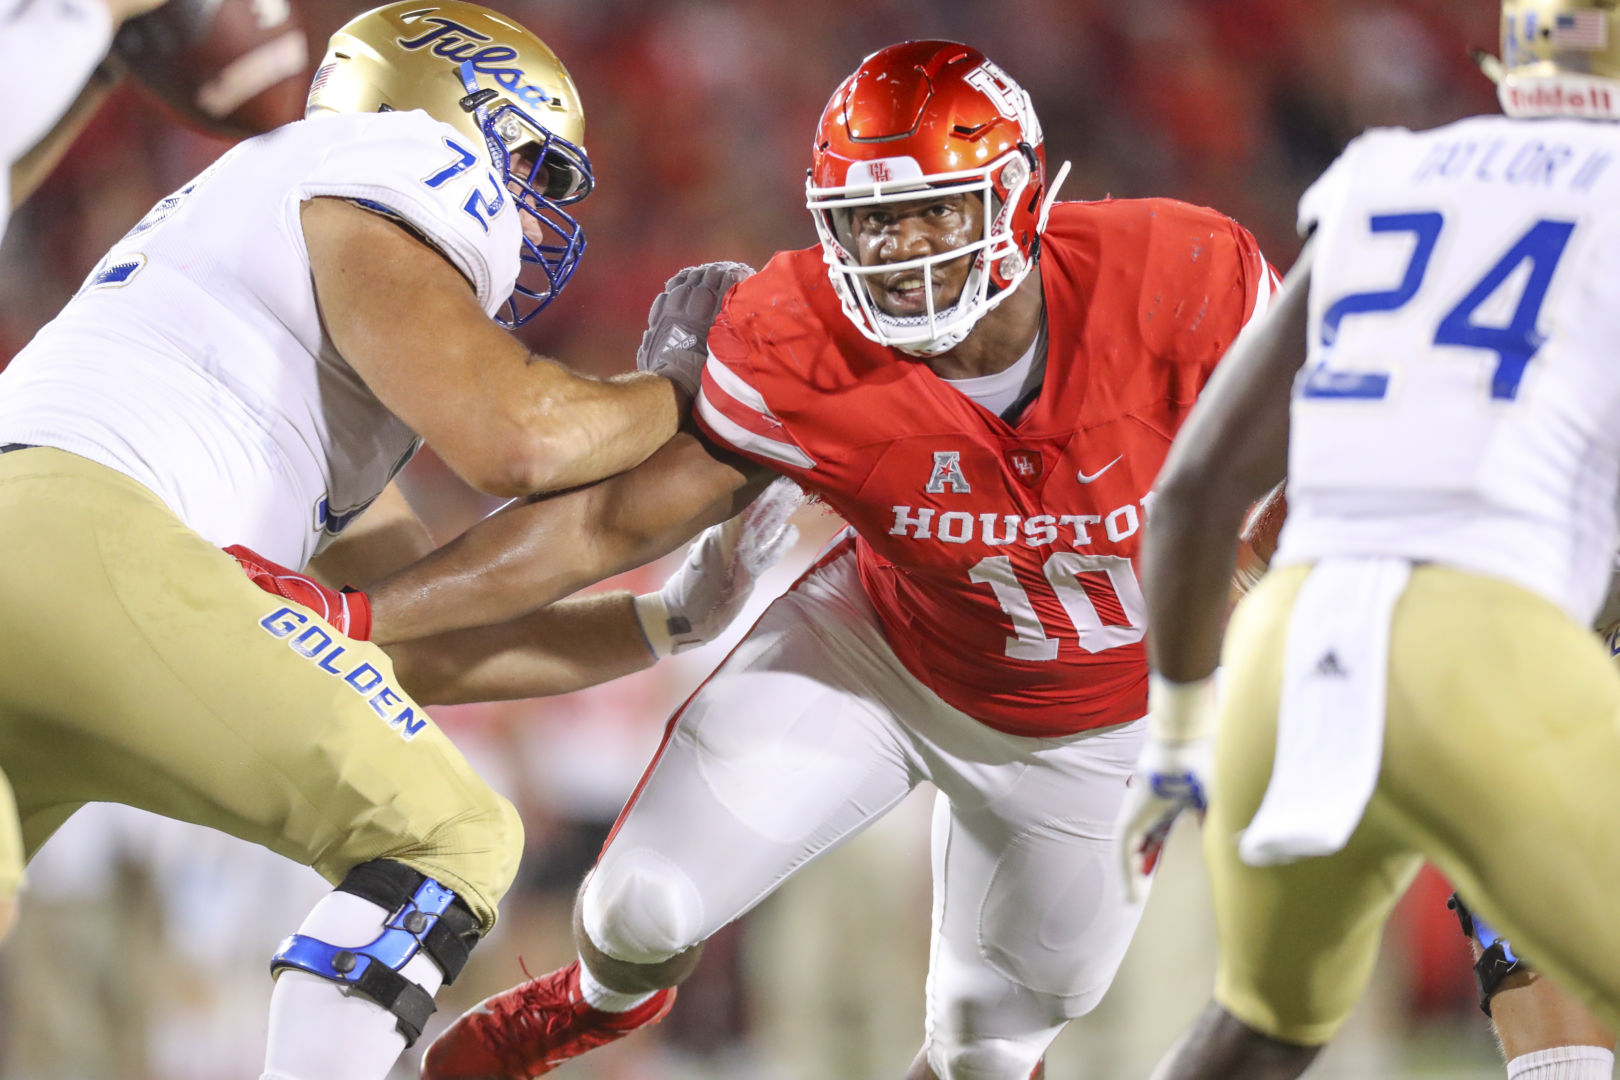 Ed Oliver played for the Cougars between 2016 to 2018, winning multiple awards including the 2017 American Athletic Conference Defensive Player of the Year | File Photo